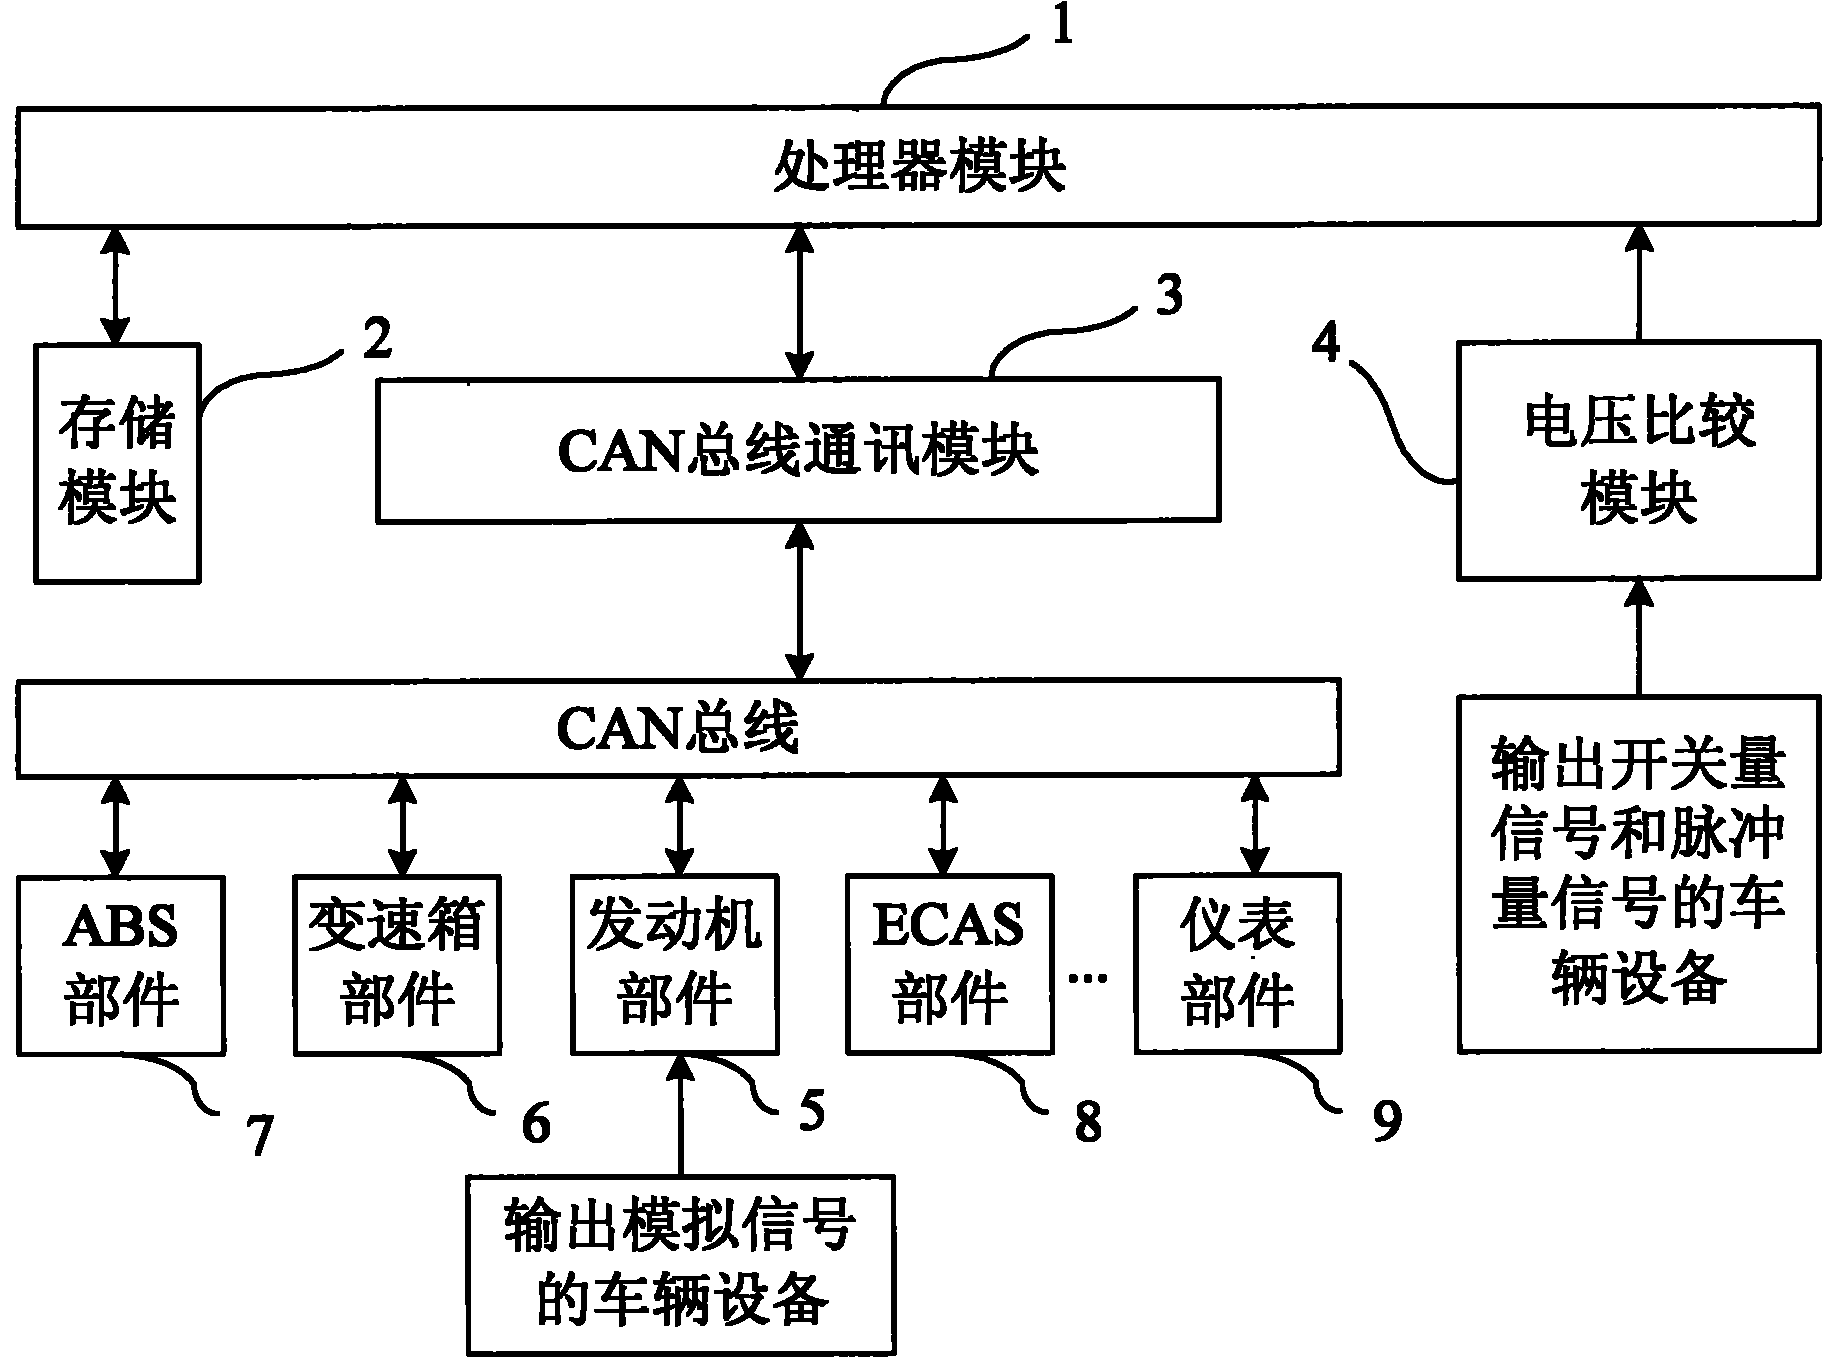 Vehicle running information acquisition device based on CAN (Controller Area Network) bus